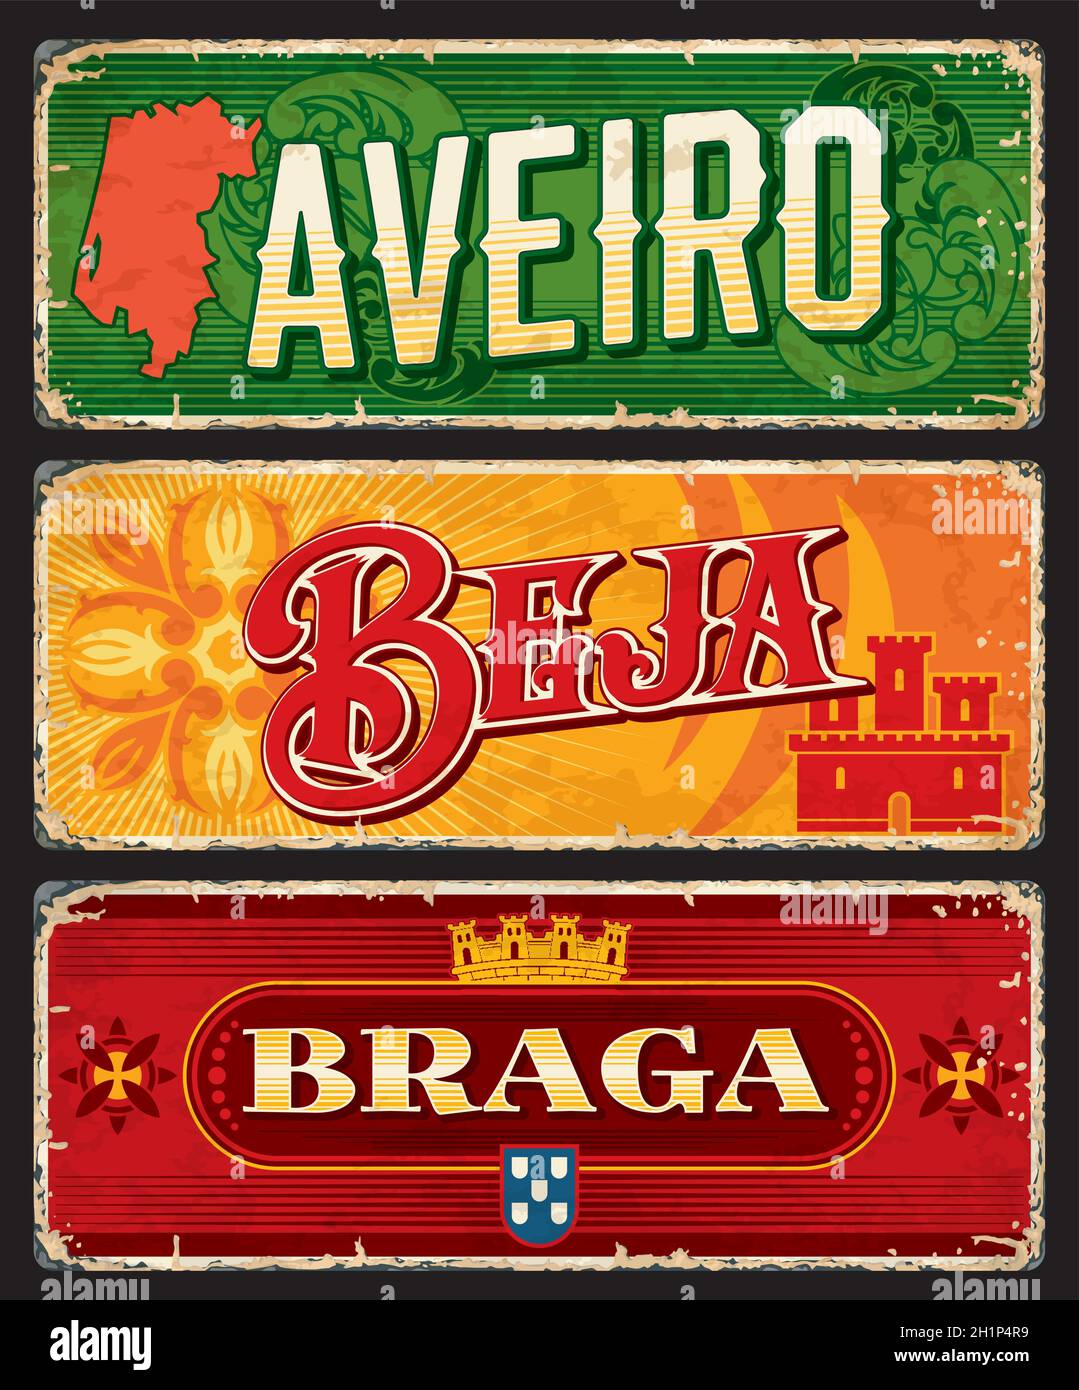 Aveiro, Braga, Beja portuguese province vector plates and tin signs. Districts of Portugal, metal rusty plates and tin signs with city tagline, flags Stock Vector